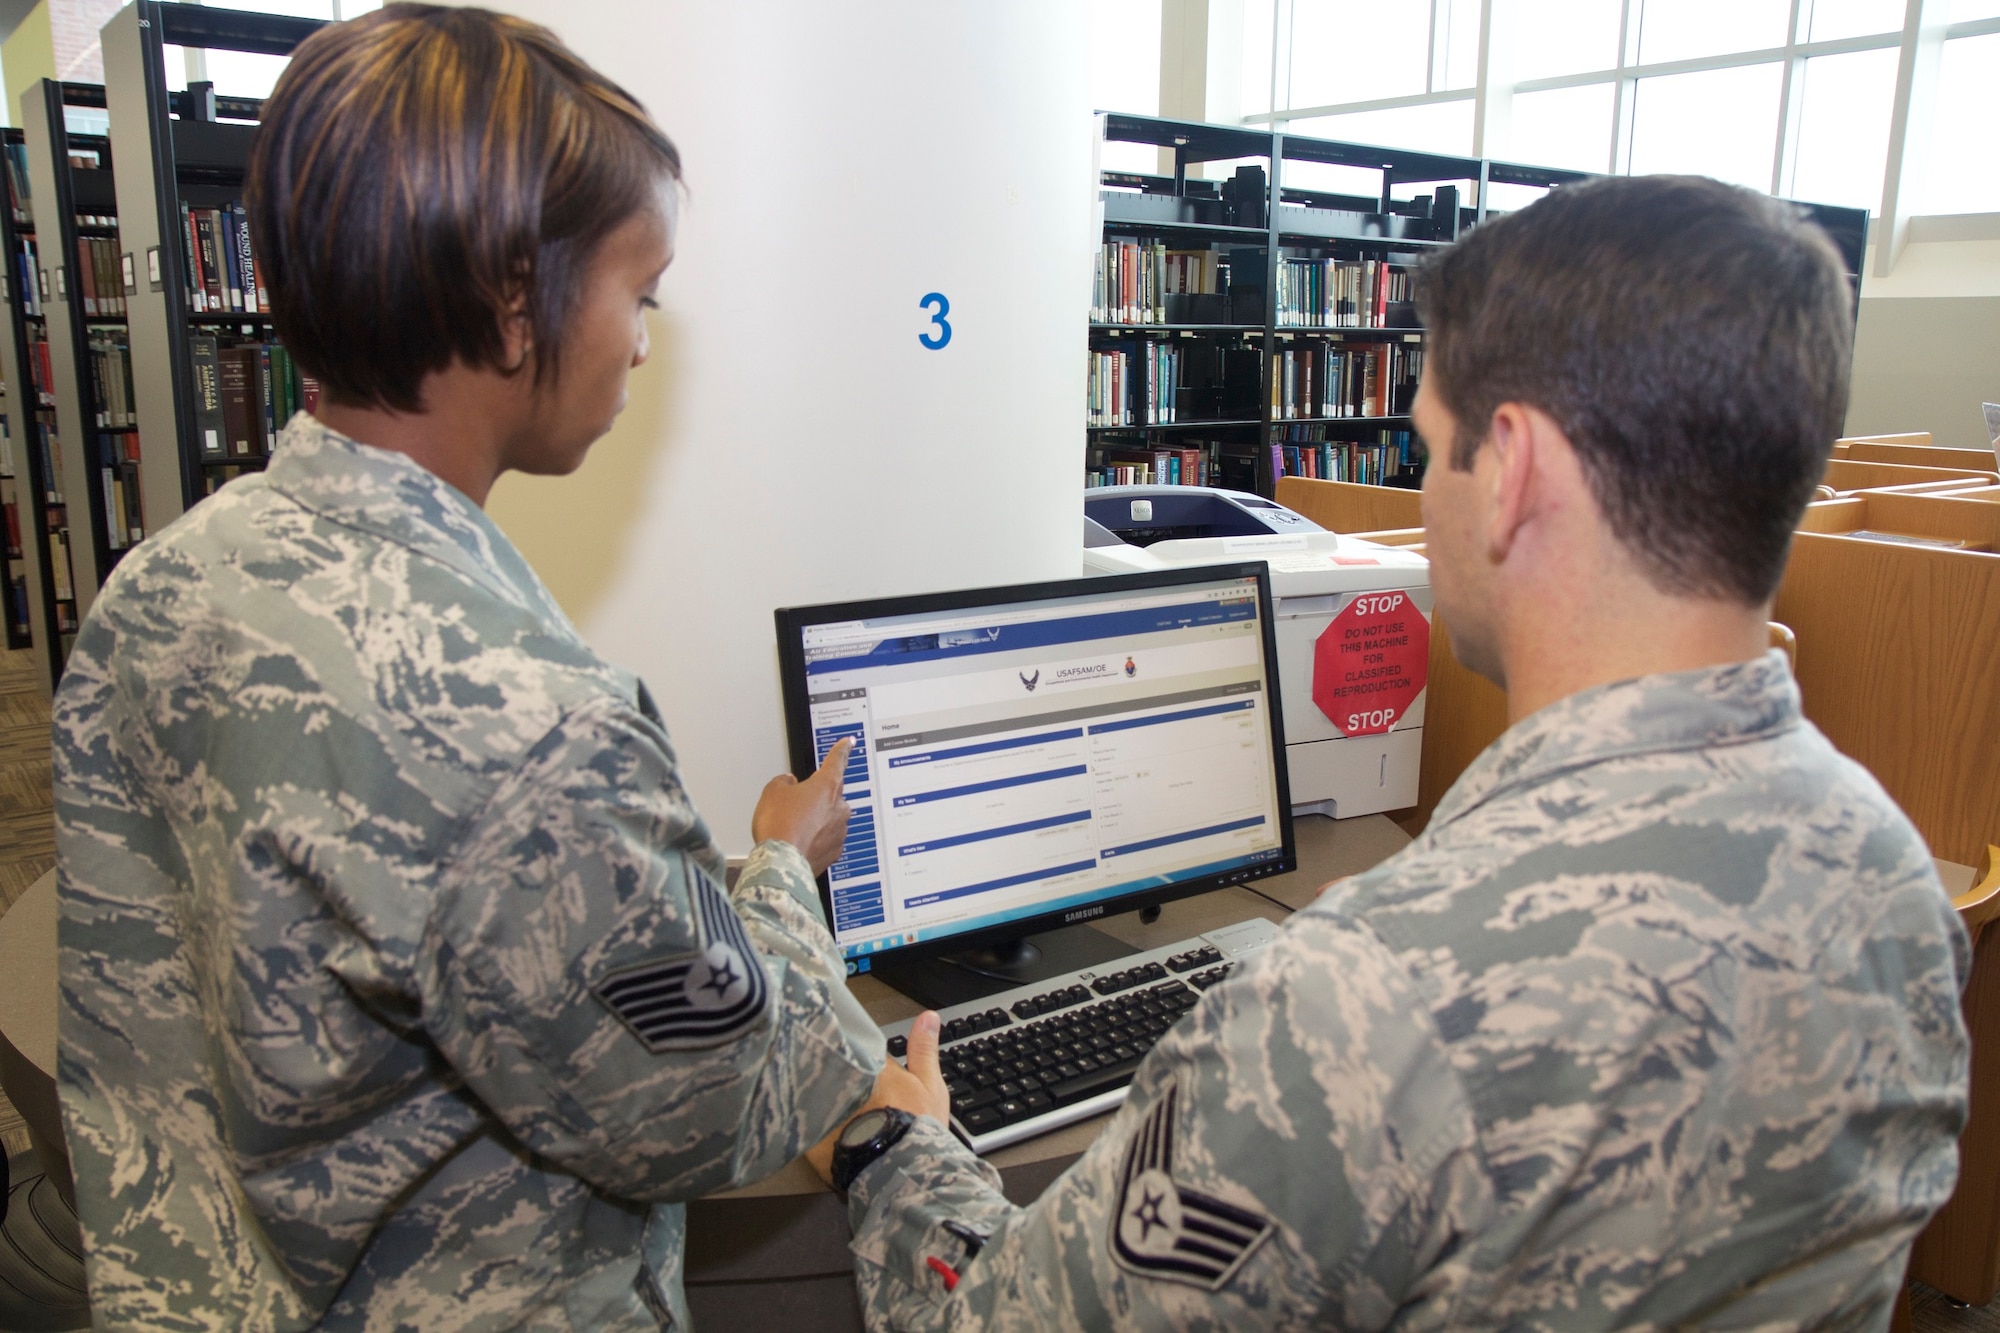 Technical Sgt. Tia Strong and Staff Sgt. Andrew Daily, instructors with the United States Air Force School of Aerospace Medicine's Department of Occupational & Environmental Health, navigate Blackboard, the
commercially-hosted Learning Management System the School has contracted with to modernize its training platforms. (U.S. Air Force photo/David W. Snedigar)
